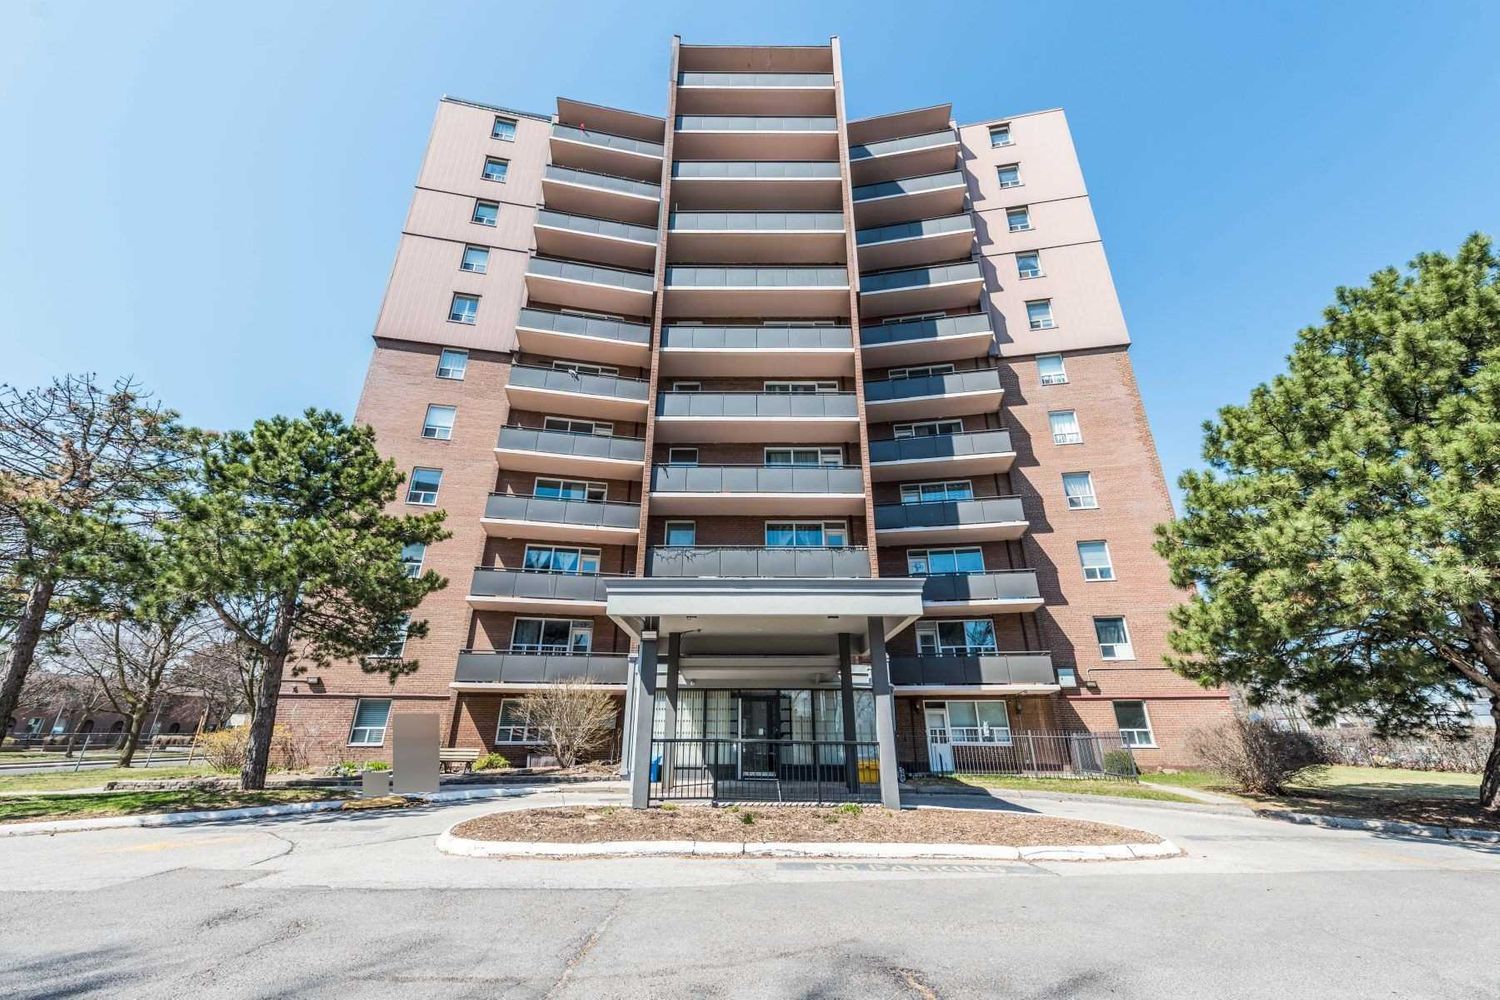 3065 Queen Frederica Drive. 3065 Queen Frederica Condos is located in  Mississauga, Toronto - image #2 of 2